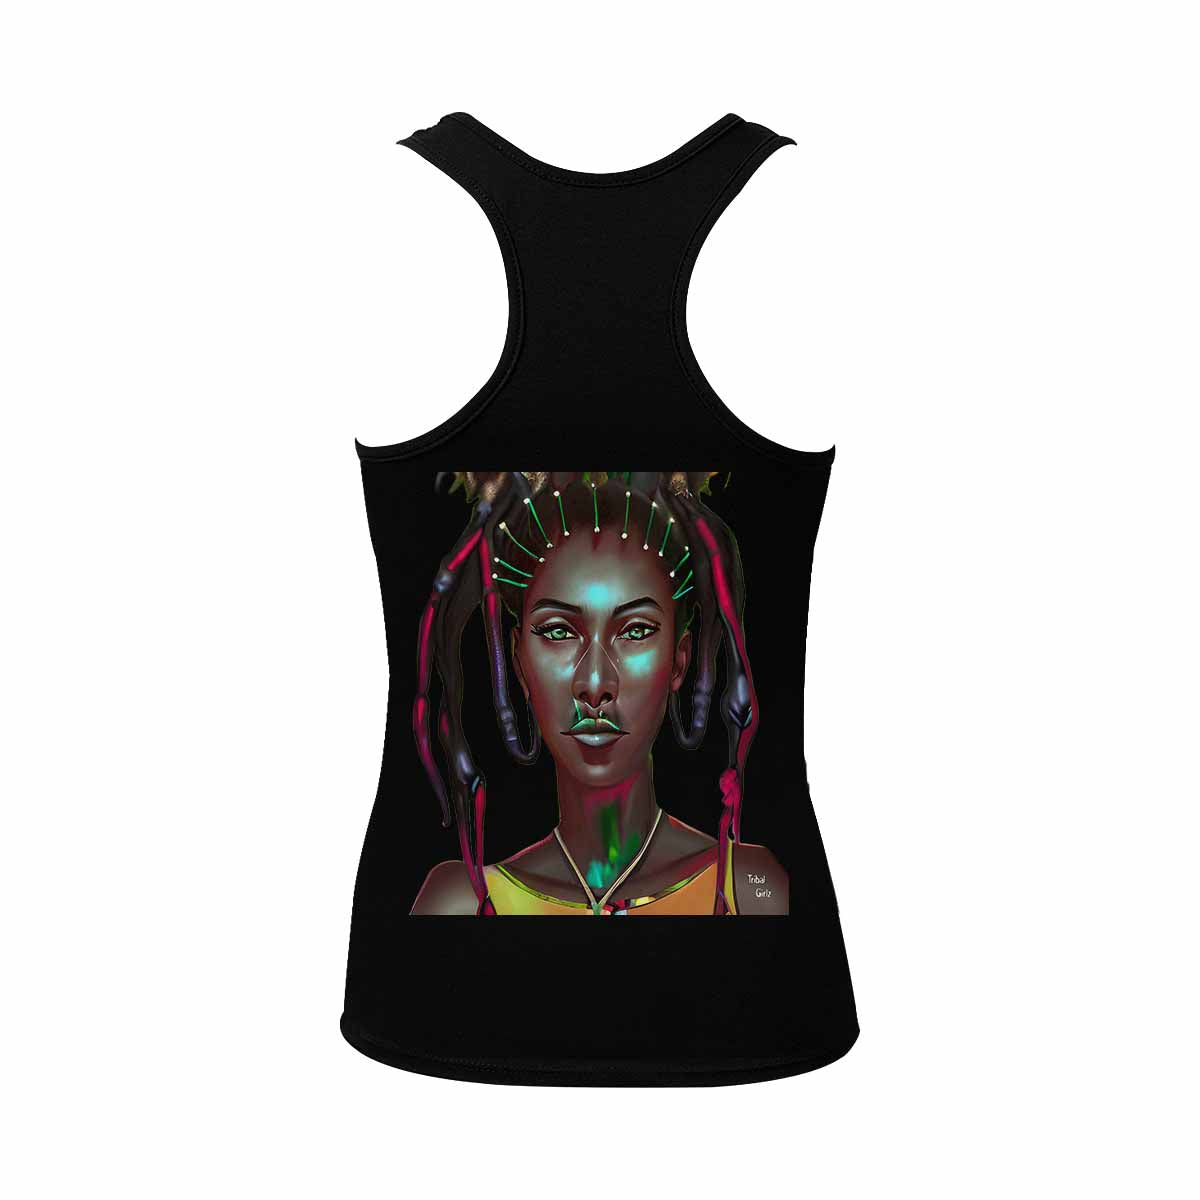 Dreads & Braids, BLACK tank top, cotton, african tribal, outline MCL, Fulangiara 31